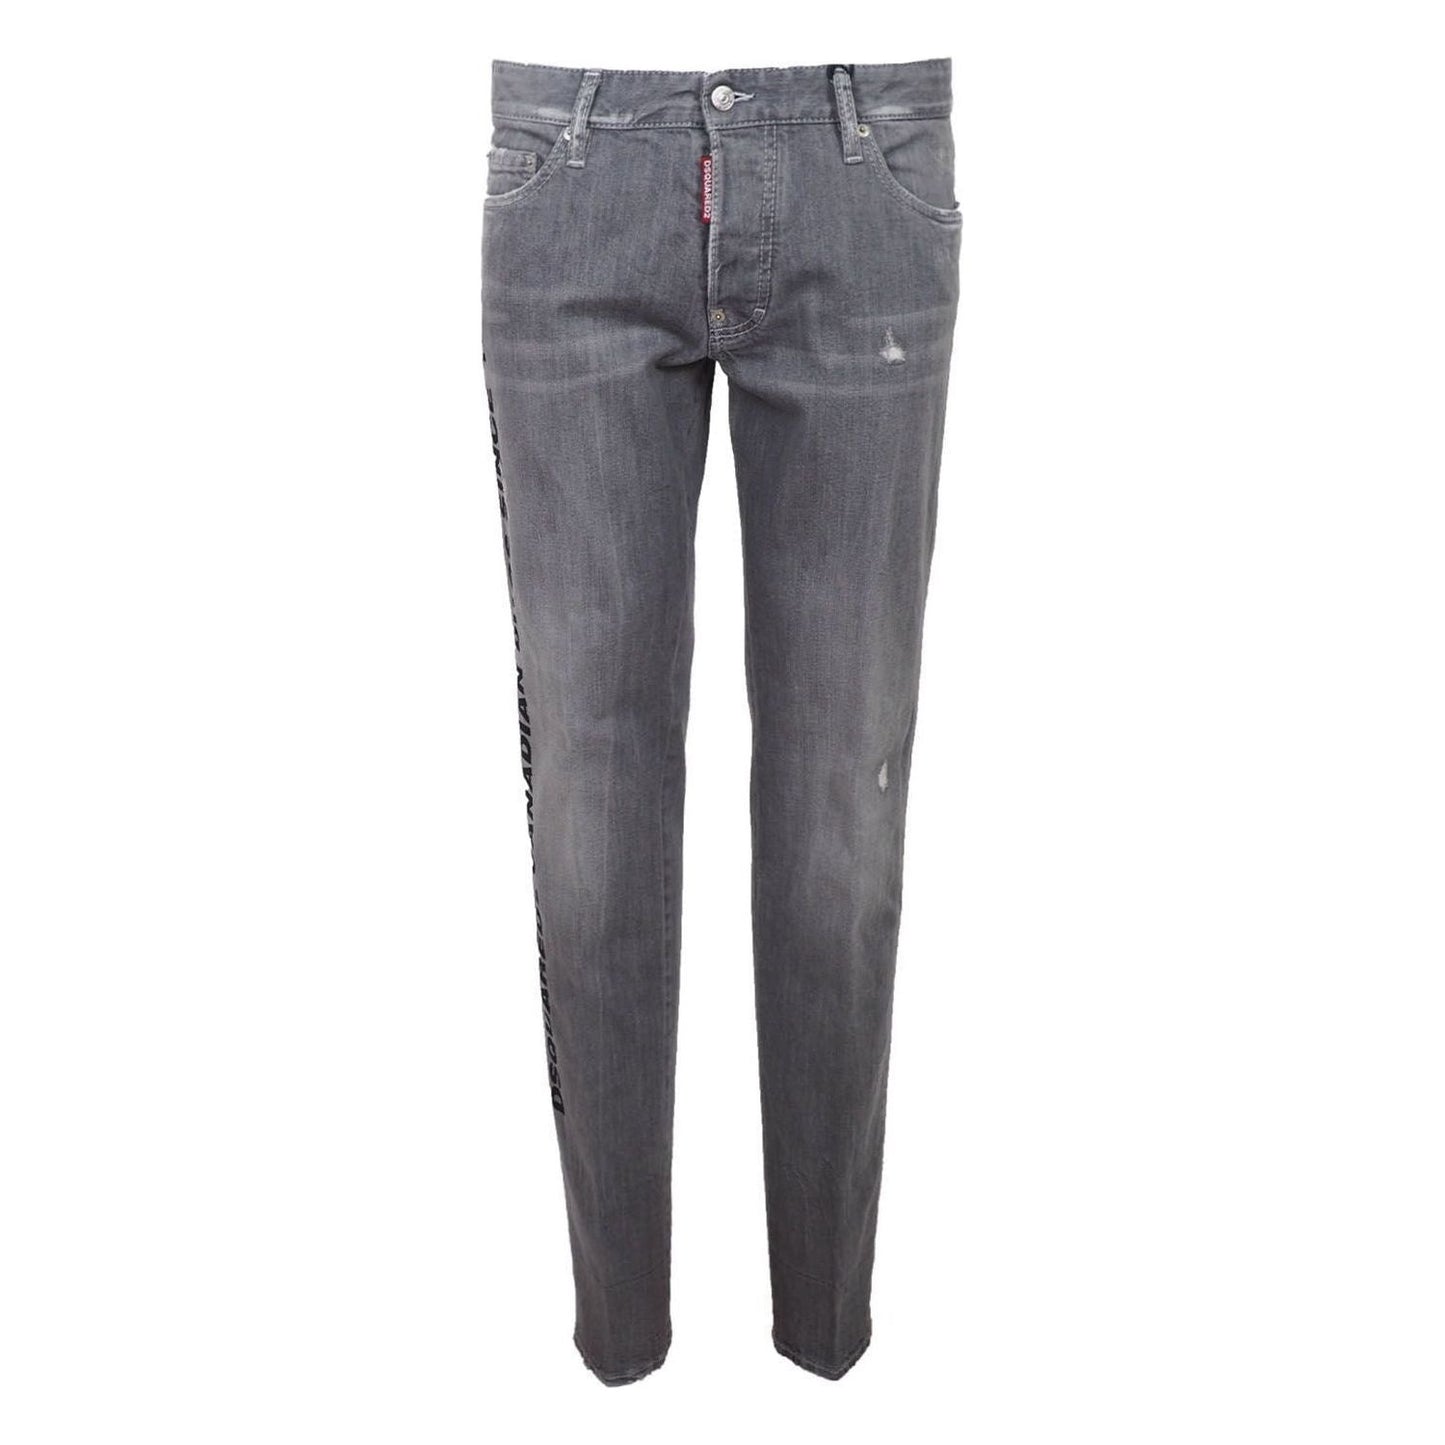 Dsquared² Chic Gray Slim-Fit Denim for the Modern Man gray-cotton-jeans-pant product-6727-1472172235-2-26b7403d-f99.jpg